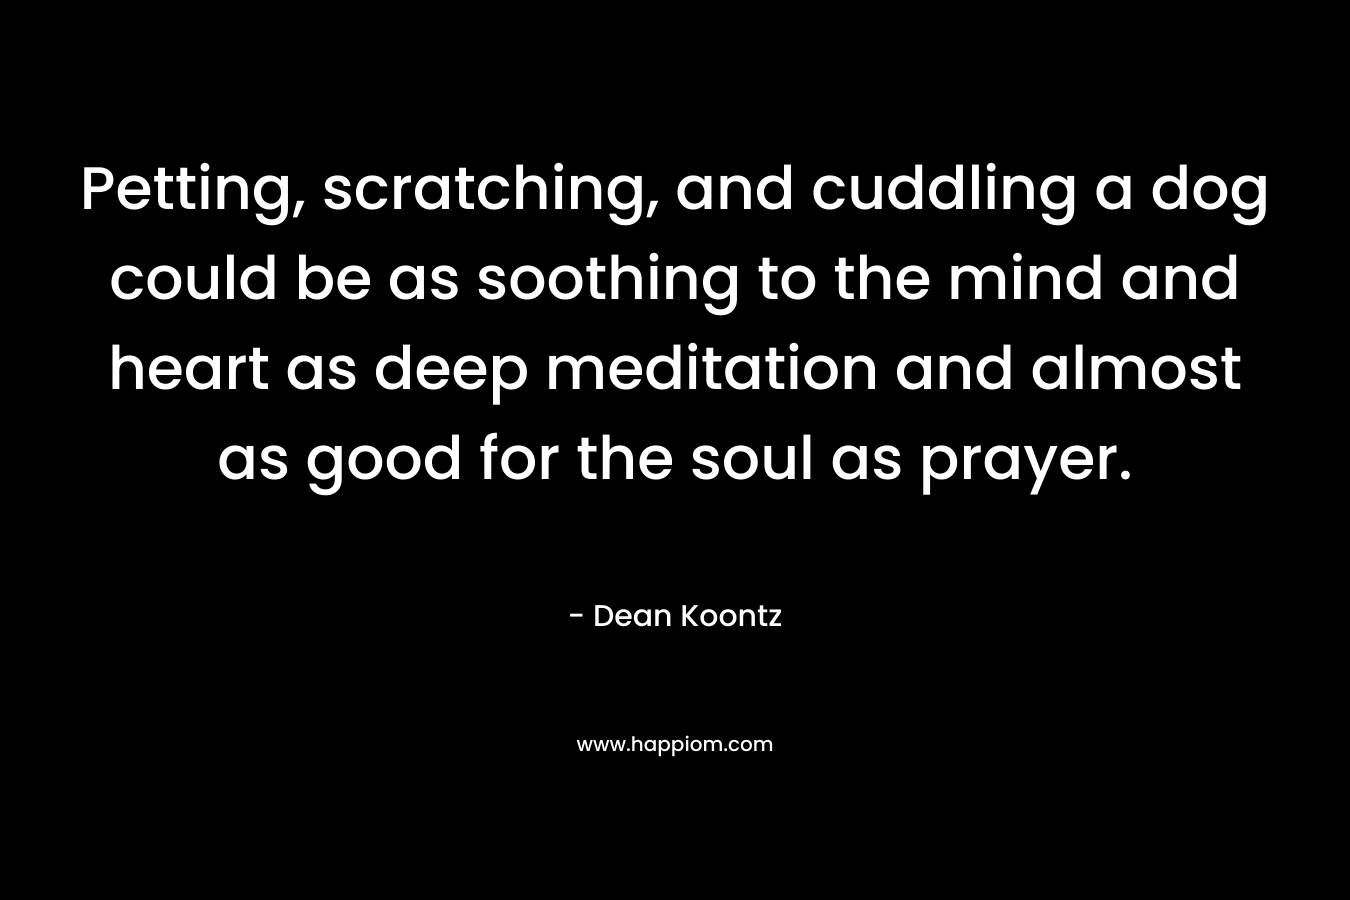 Petting, scratching, and cuddling a dog could be as soothing to the mind and heart as deep meditation and almost as good for the soul as prayer. – Dean Koontz